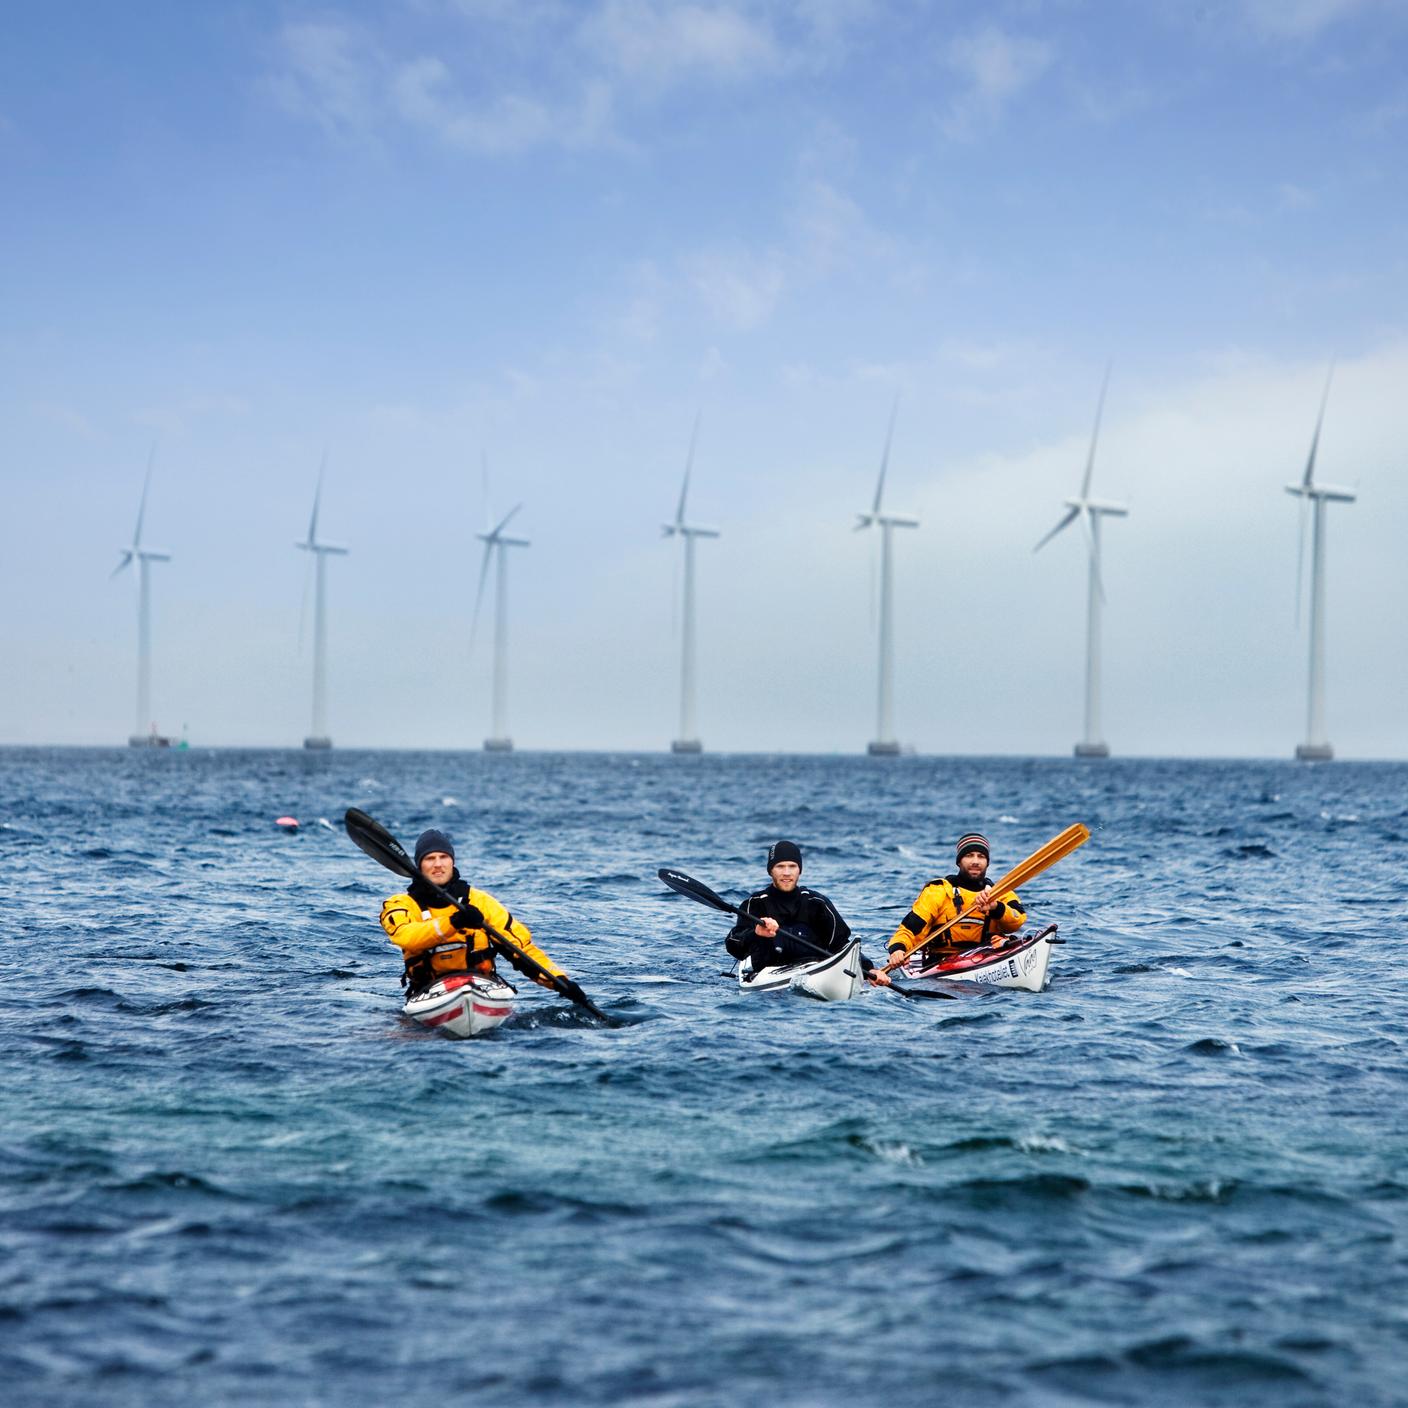 Kayaks at sea in front of wind turbines